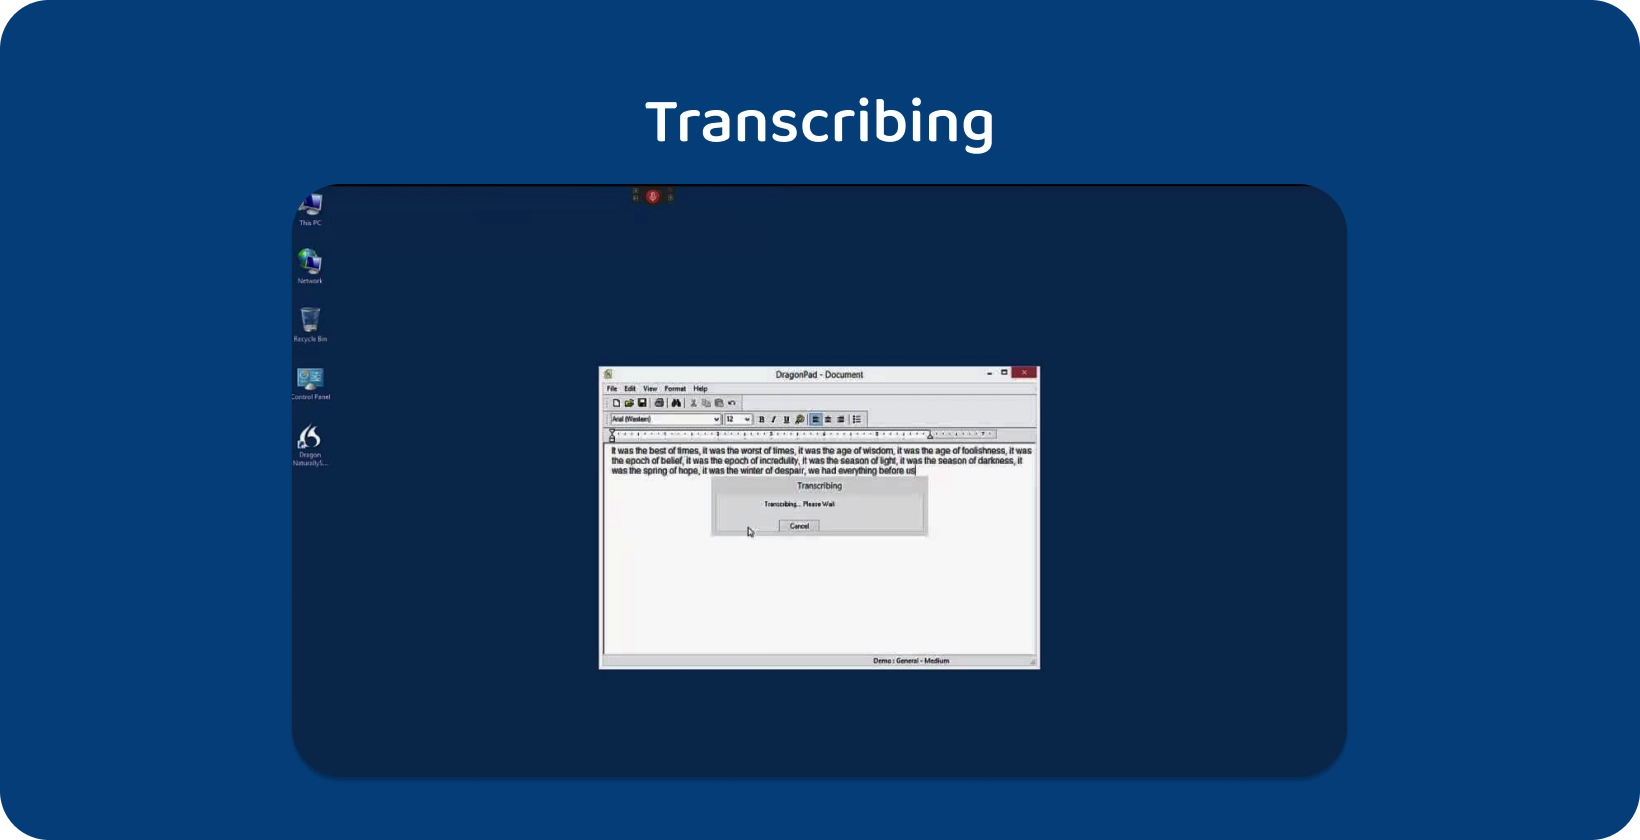 Dragon NaturallySpeaking text editor actively transcribing an ongoing interview displayed on a desktop screen.